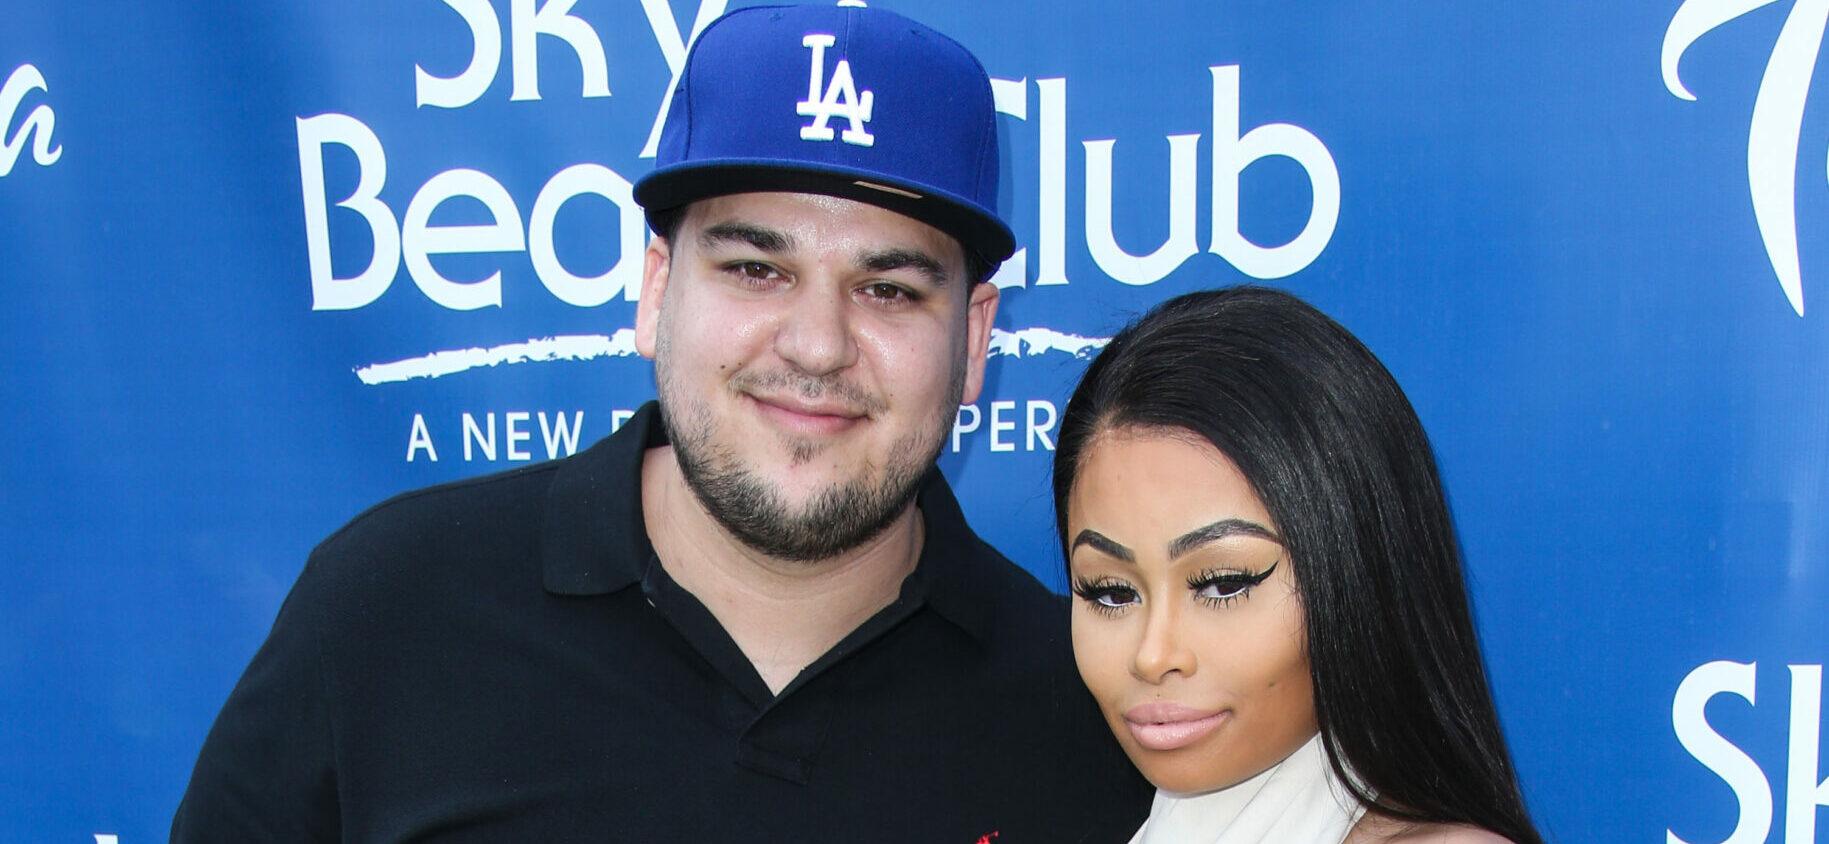 Rob Kardashian Joins Protest Against LAPD Over 14-Year-Old's Death